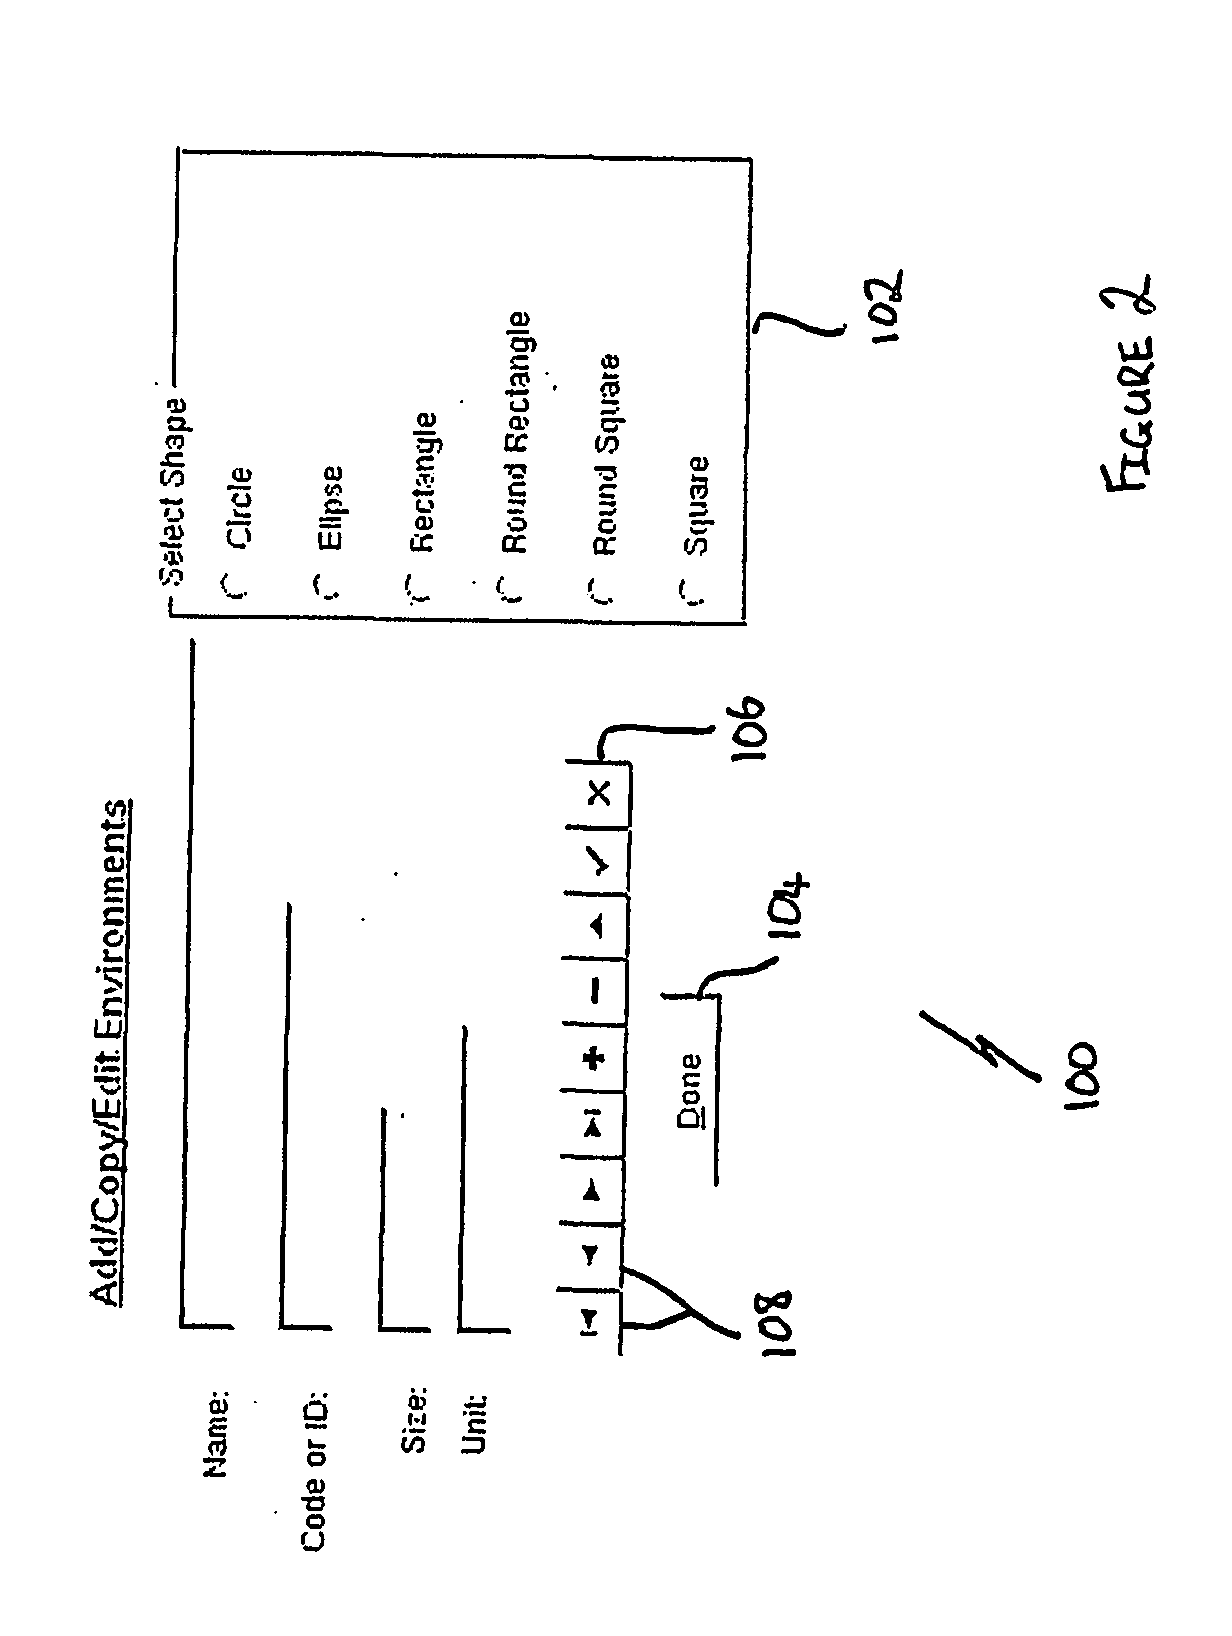 Process control system and method for configuring a process control system